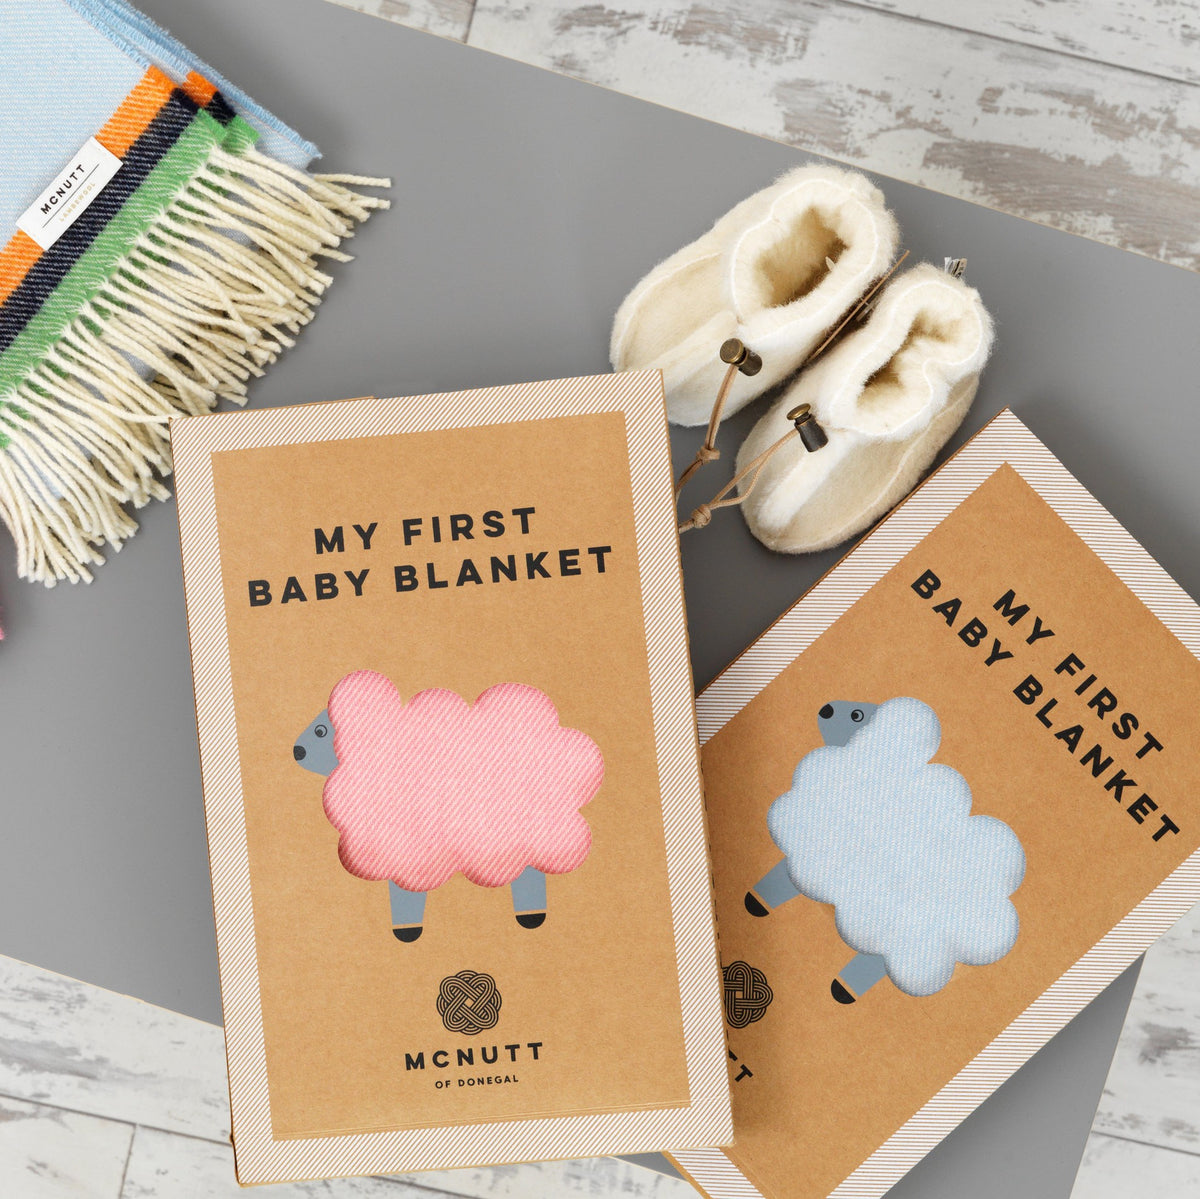 Baby Blankets in Gift Packaging from McNutt of Donegal